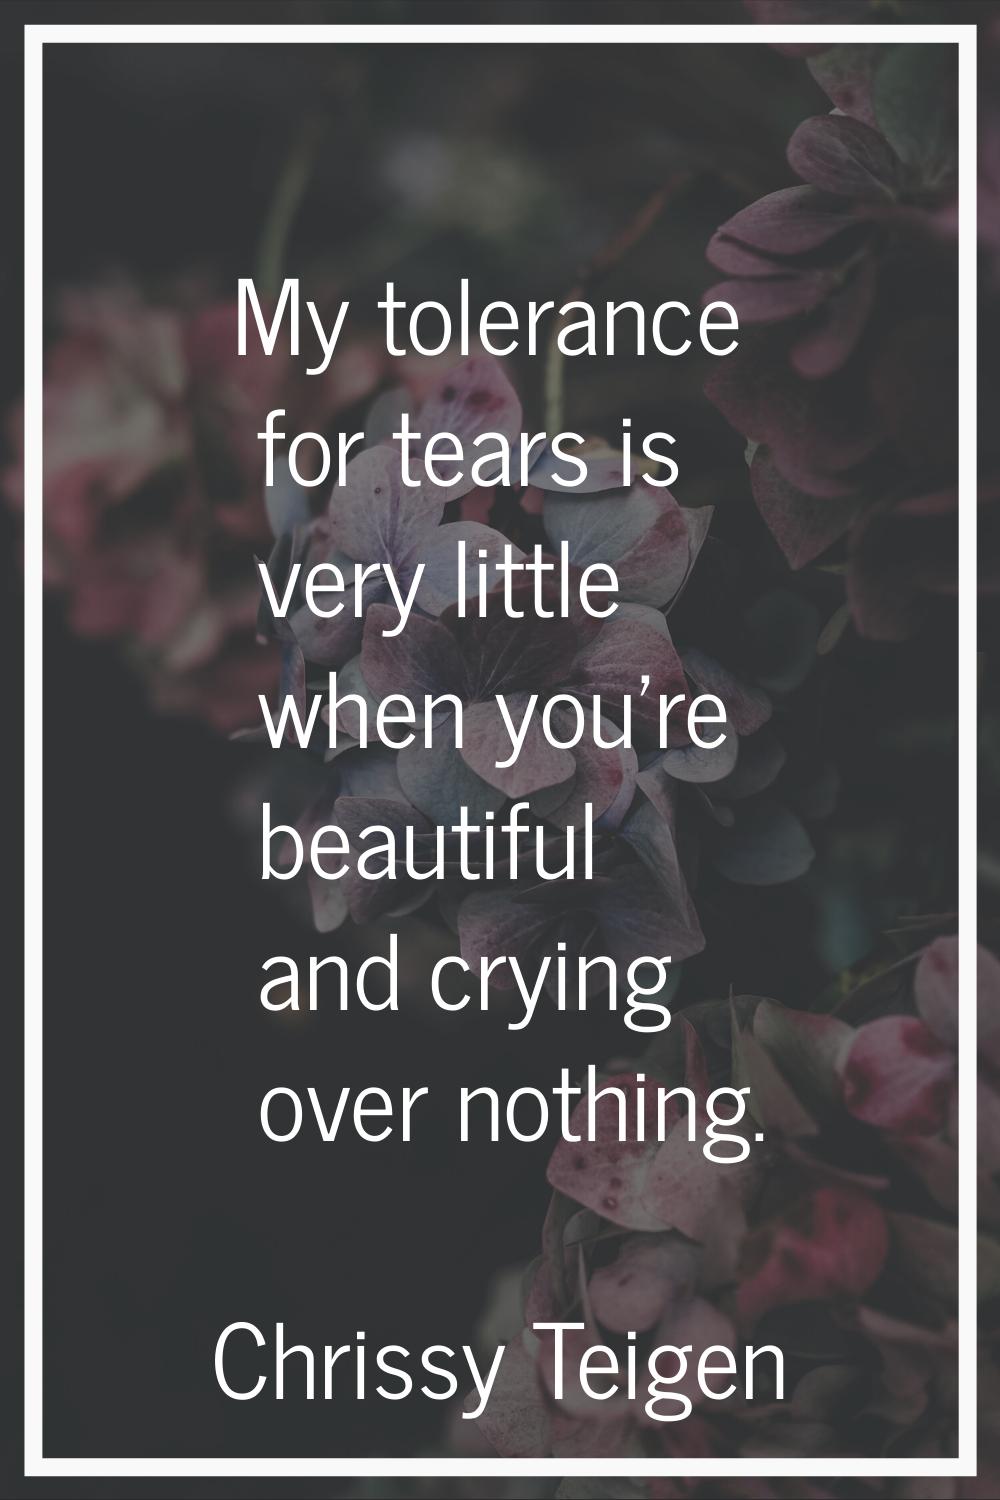 My tolerance for tears is very little when you're beautiful and crying over nothing.